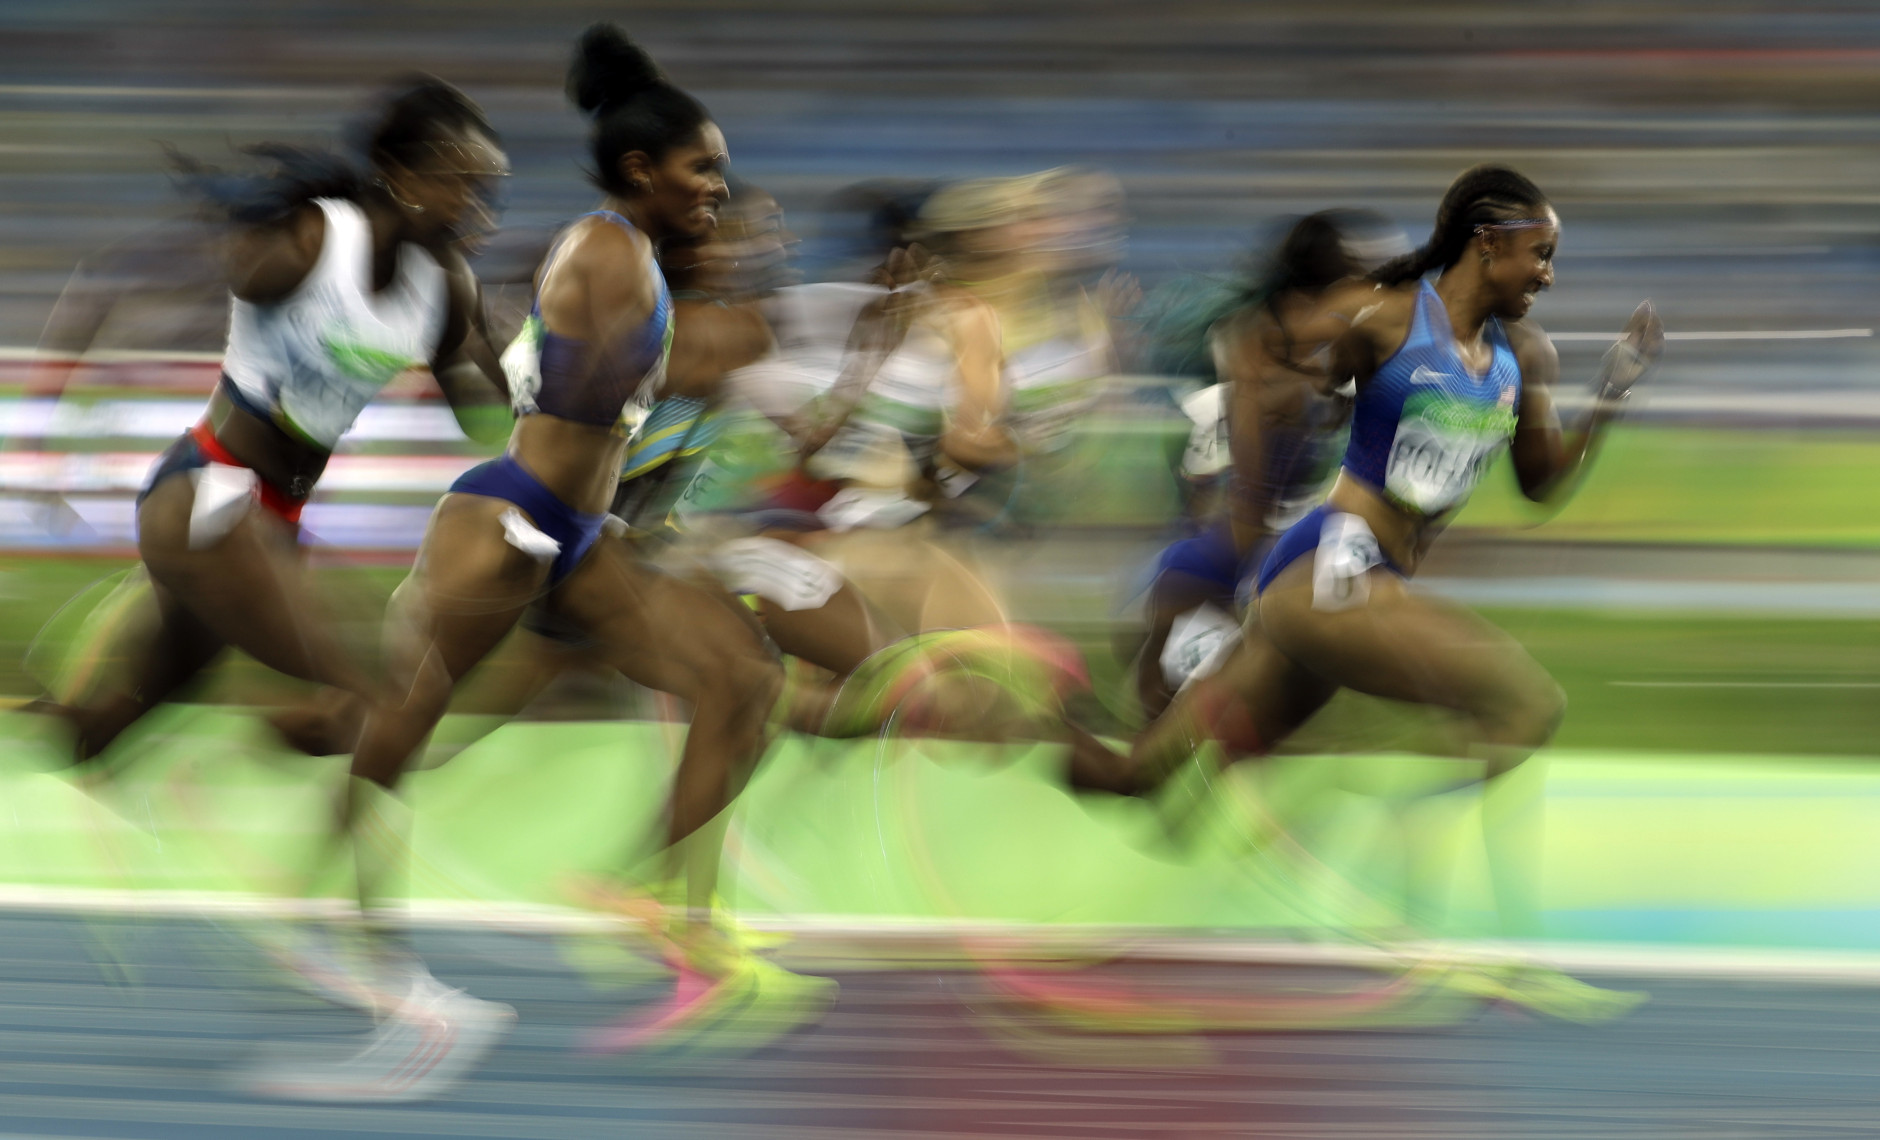 United States' Brianna Rollins, right, competes in the women's 100-meter hurdles final during the athletics competitions of the 2016 Summer Olympics at the Olympic stadium in Rio de Janeiro, Brazil, Wednesday, Aug. 17, 2016. (AP Photo/Charlie Riedel)